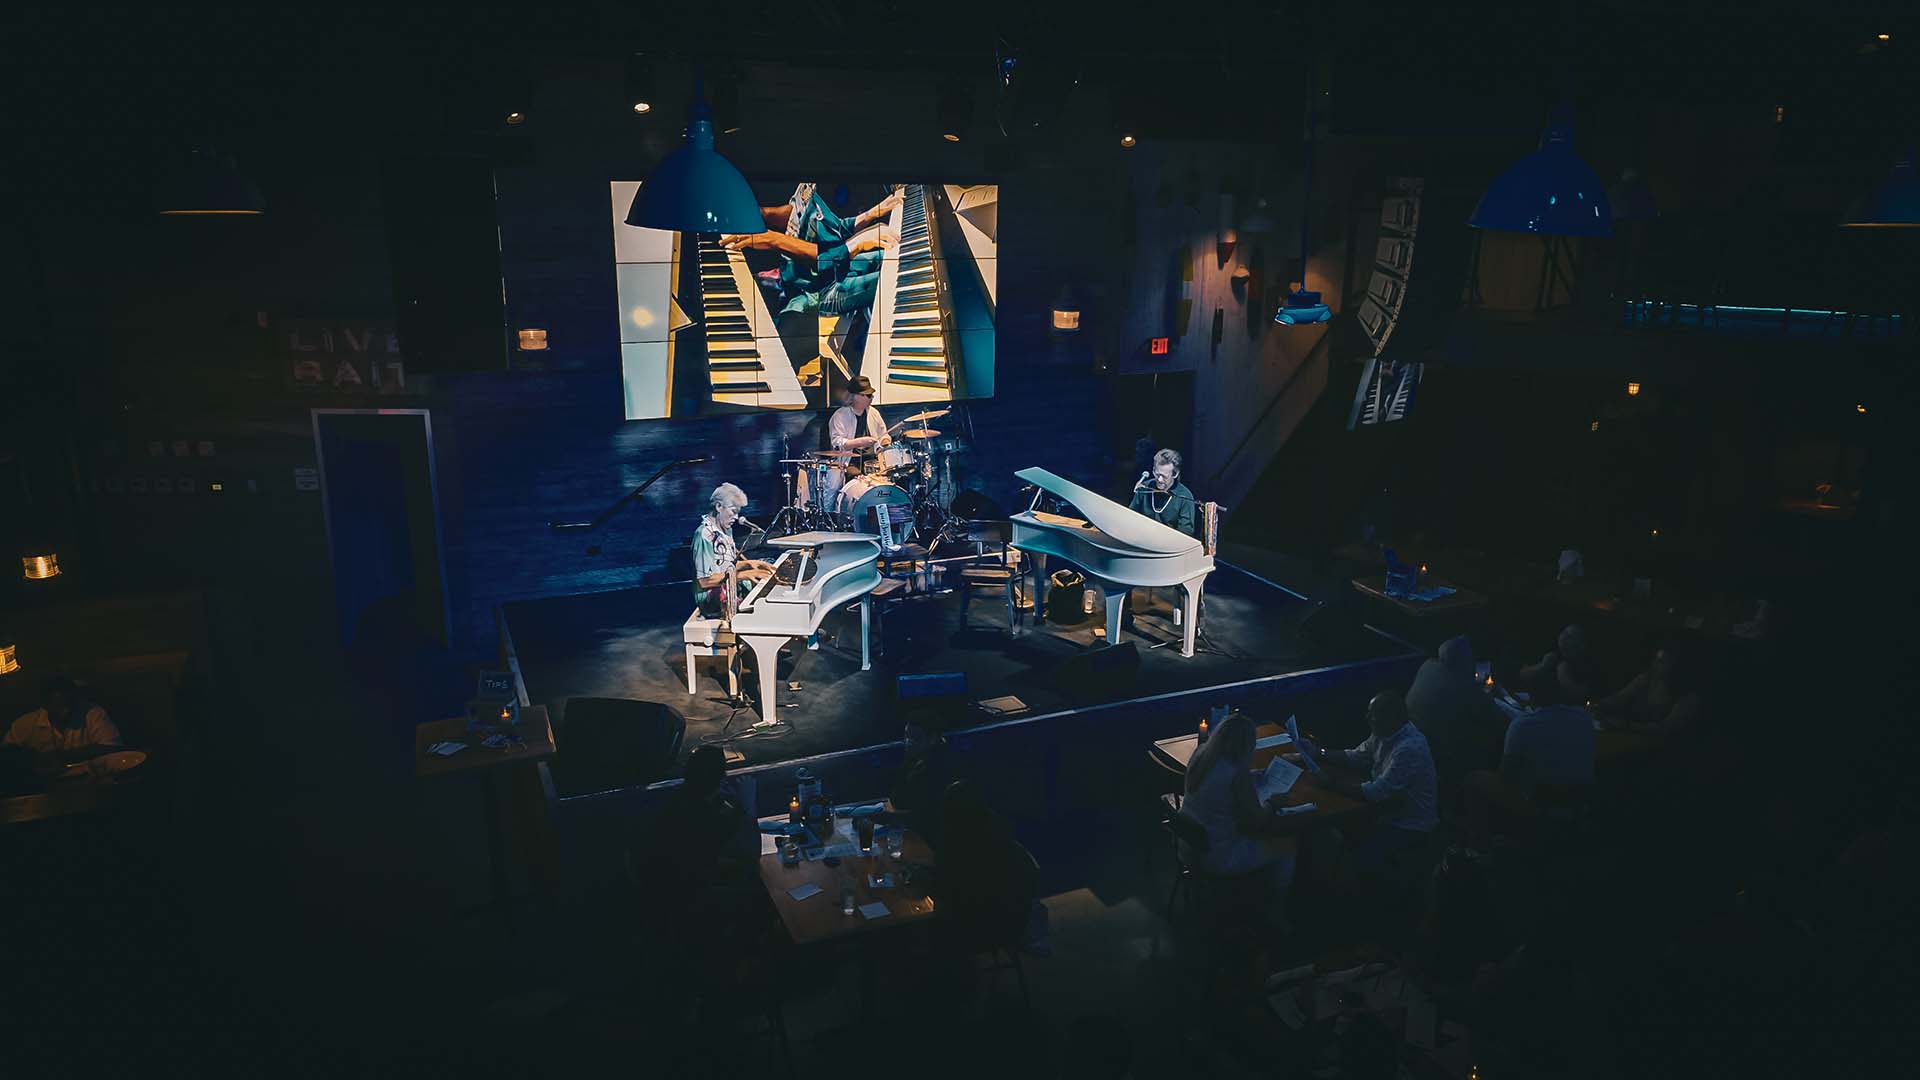 Dockside Dueling Pianos performance on The Wharf stage